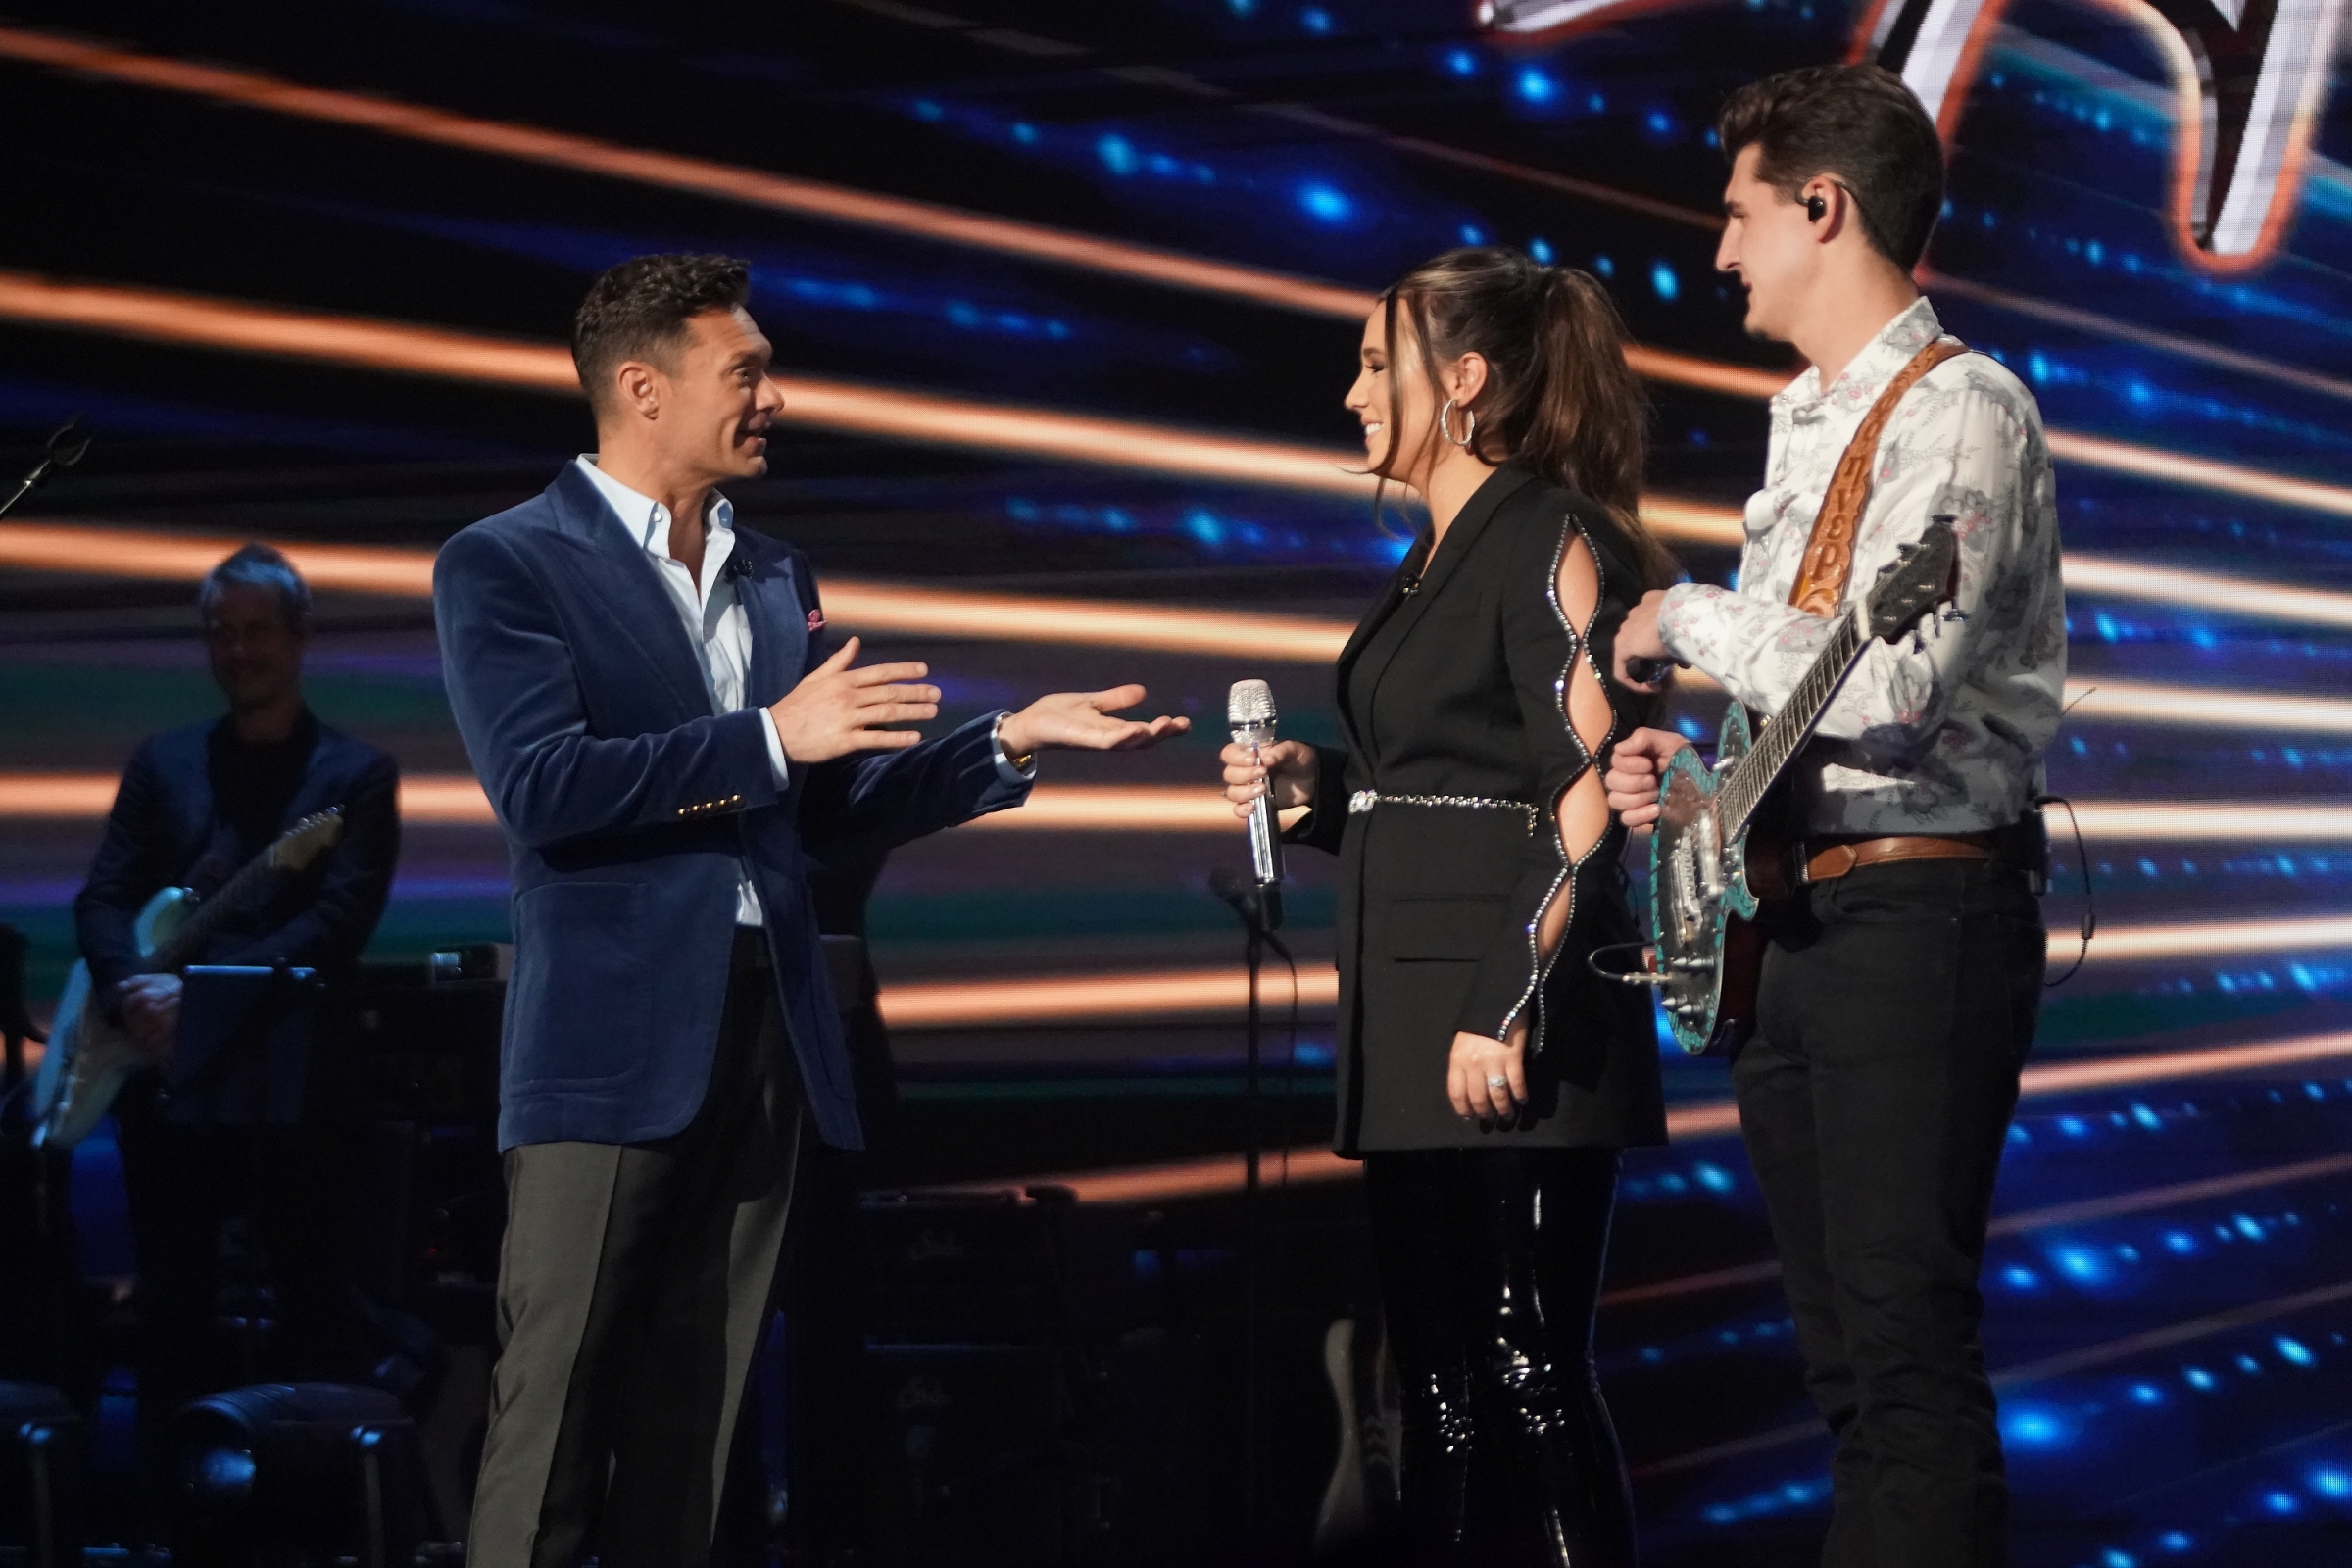 Ryan Seacrest, Gabby Barrett, and Cade Foehner during the American Idol Grand Finale on May 22, 2022.
